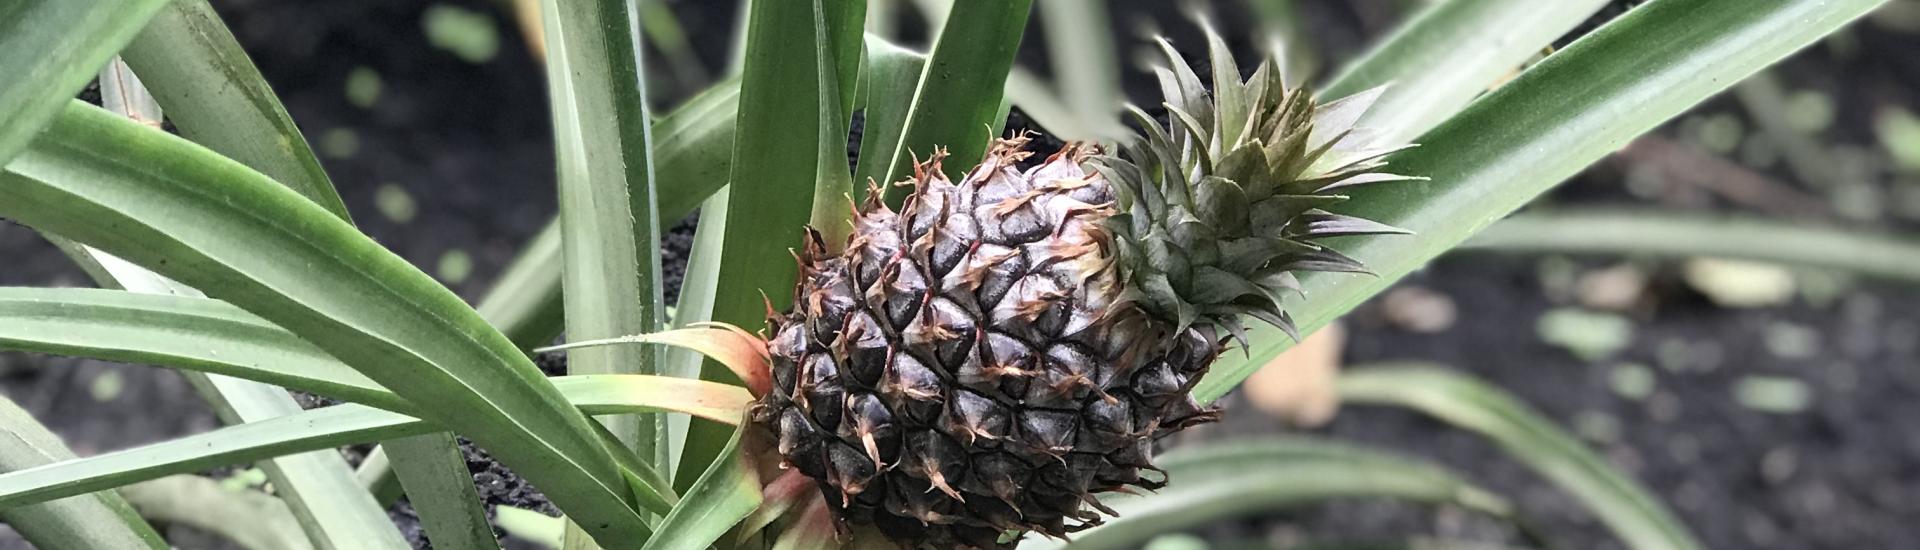 Pineapple fruit growing from plant